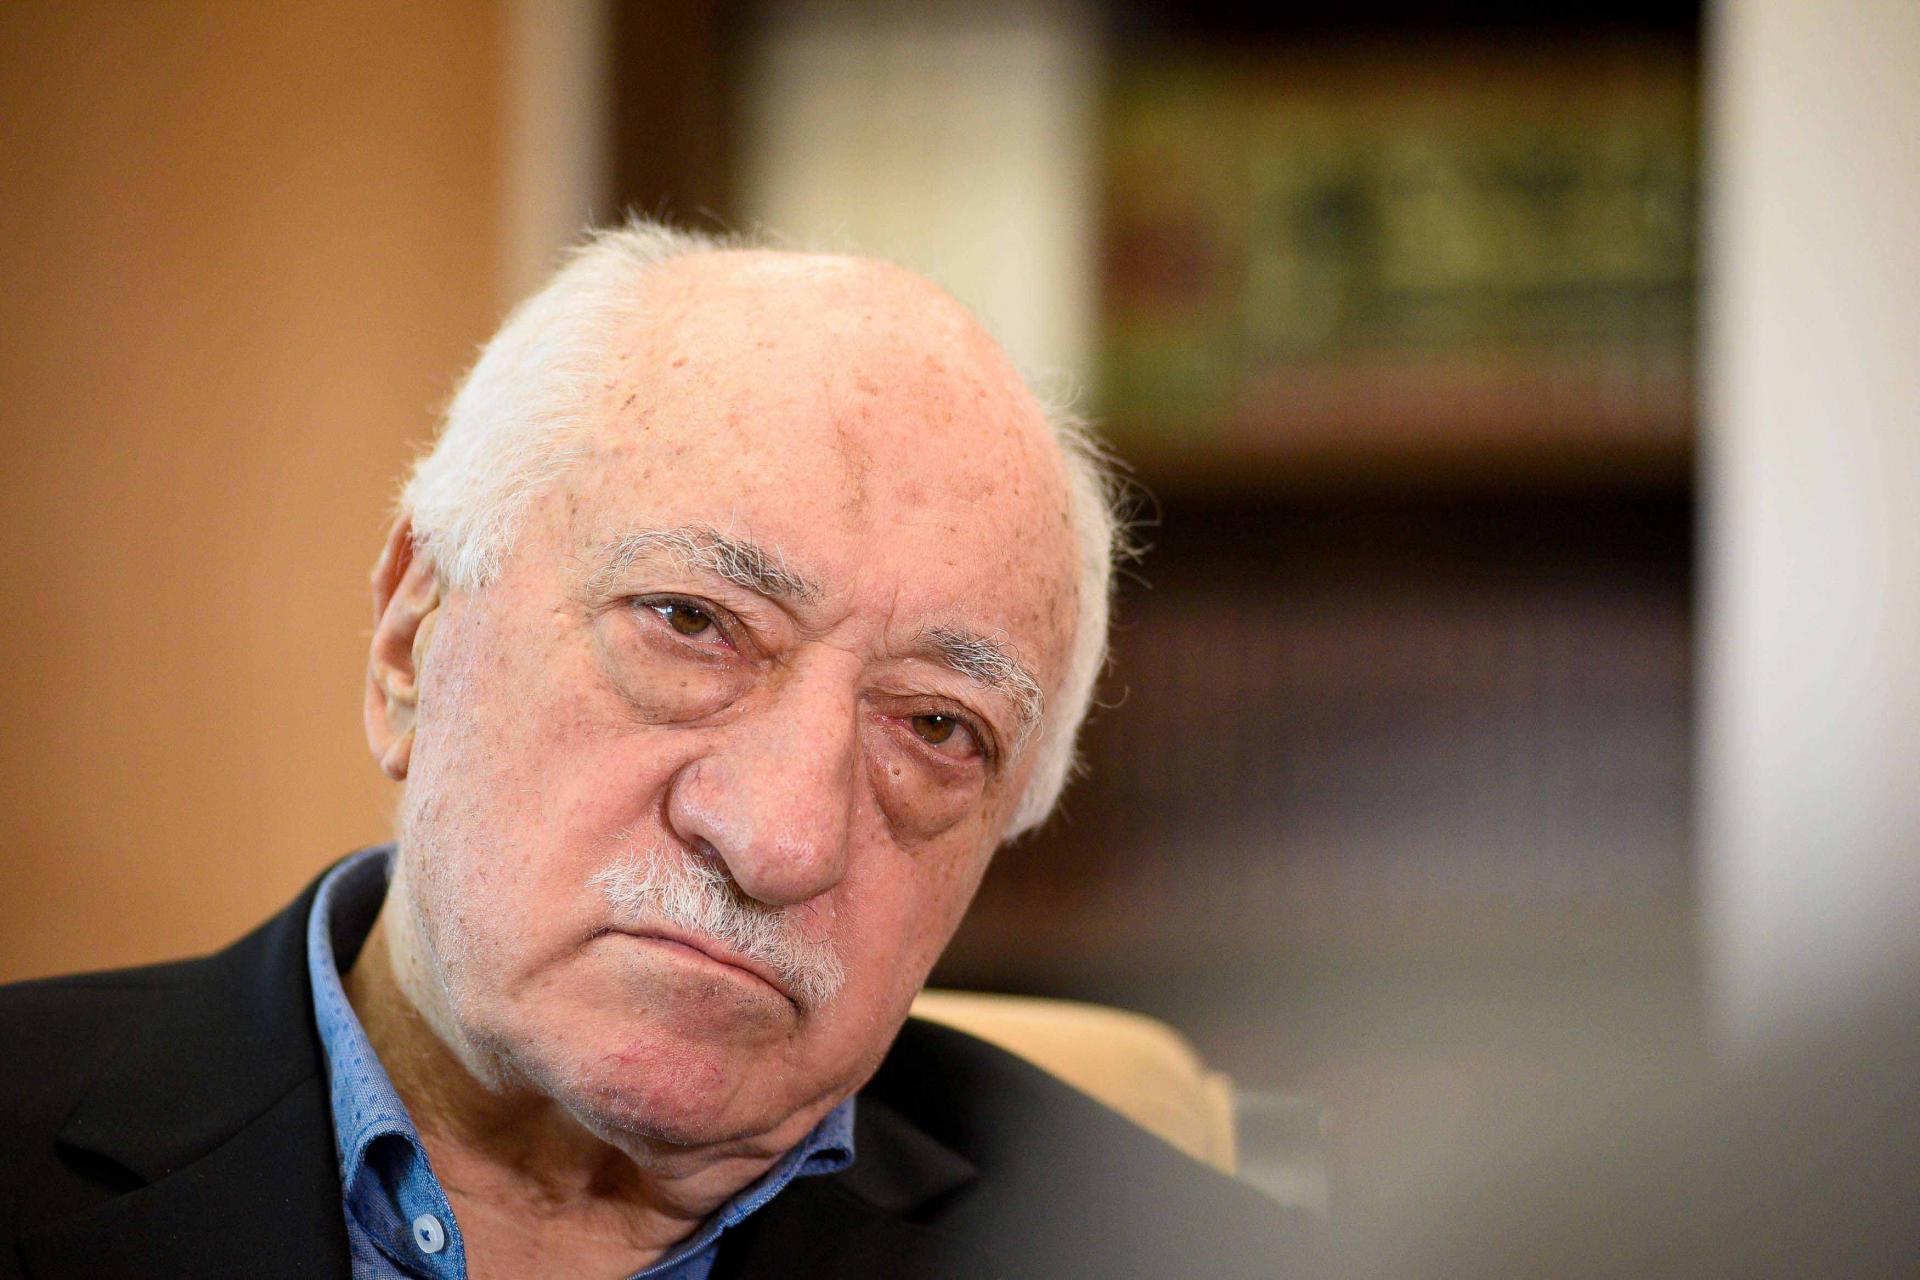 Ankara accuses Gulen of ordering the attempted overthrow of President Recep Tayyip Erdogan on July 15, 2016 but he strongly denies the claims